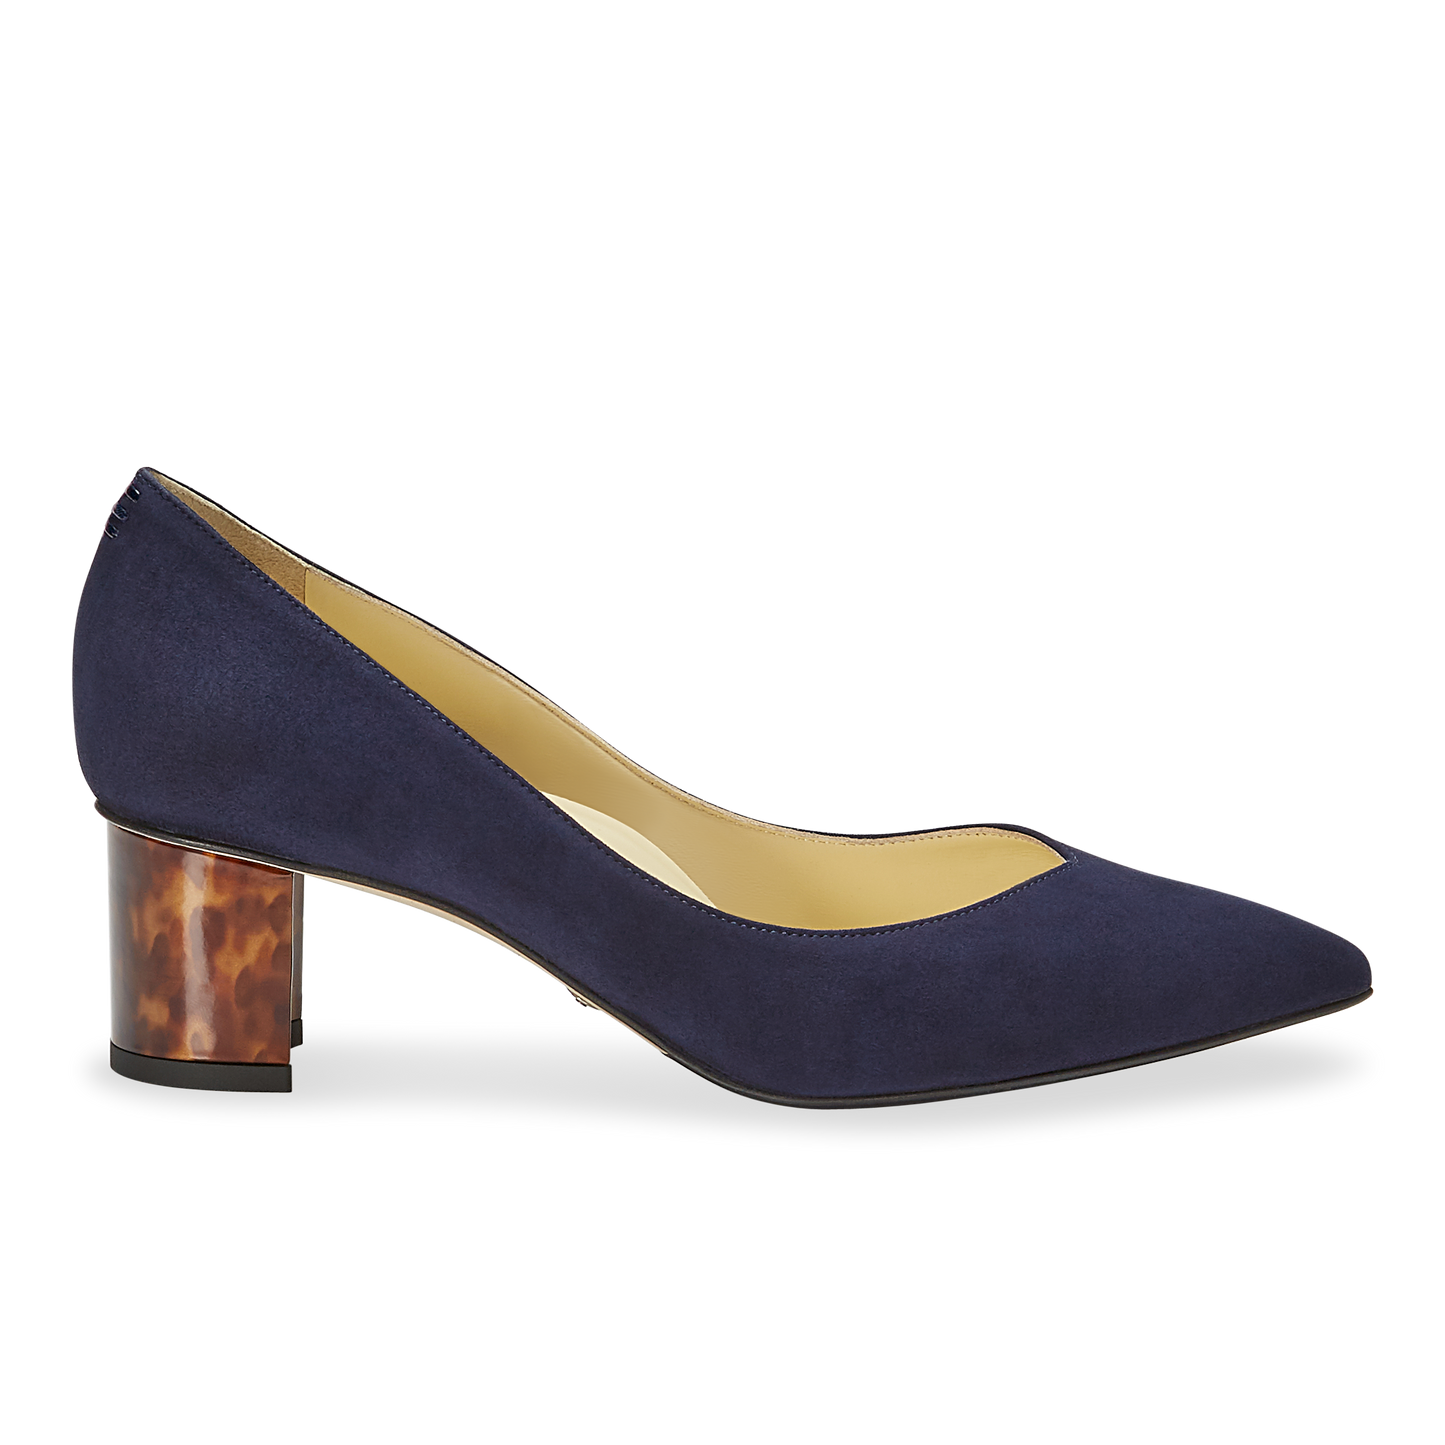 50mm Italian Made Pointed Toe Perfect Emma Pump in Navy Suede